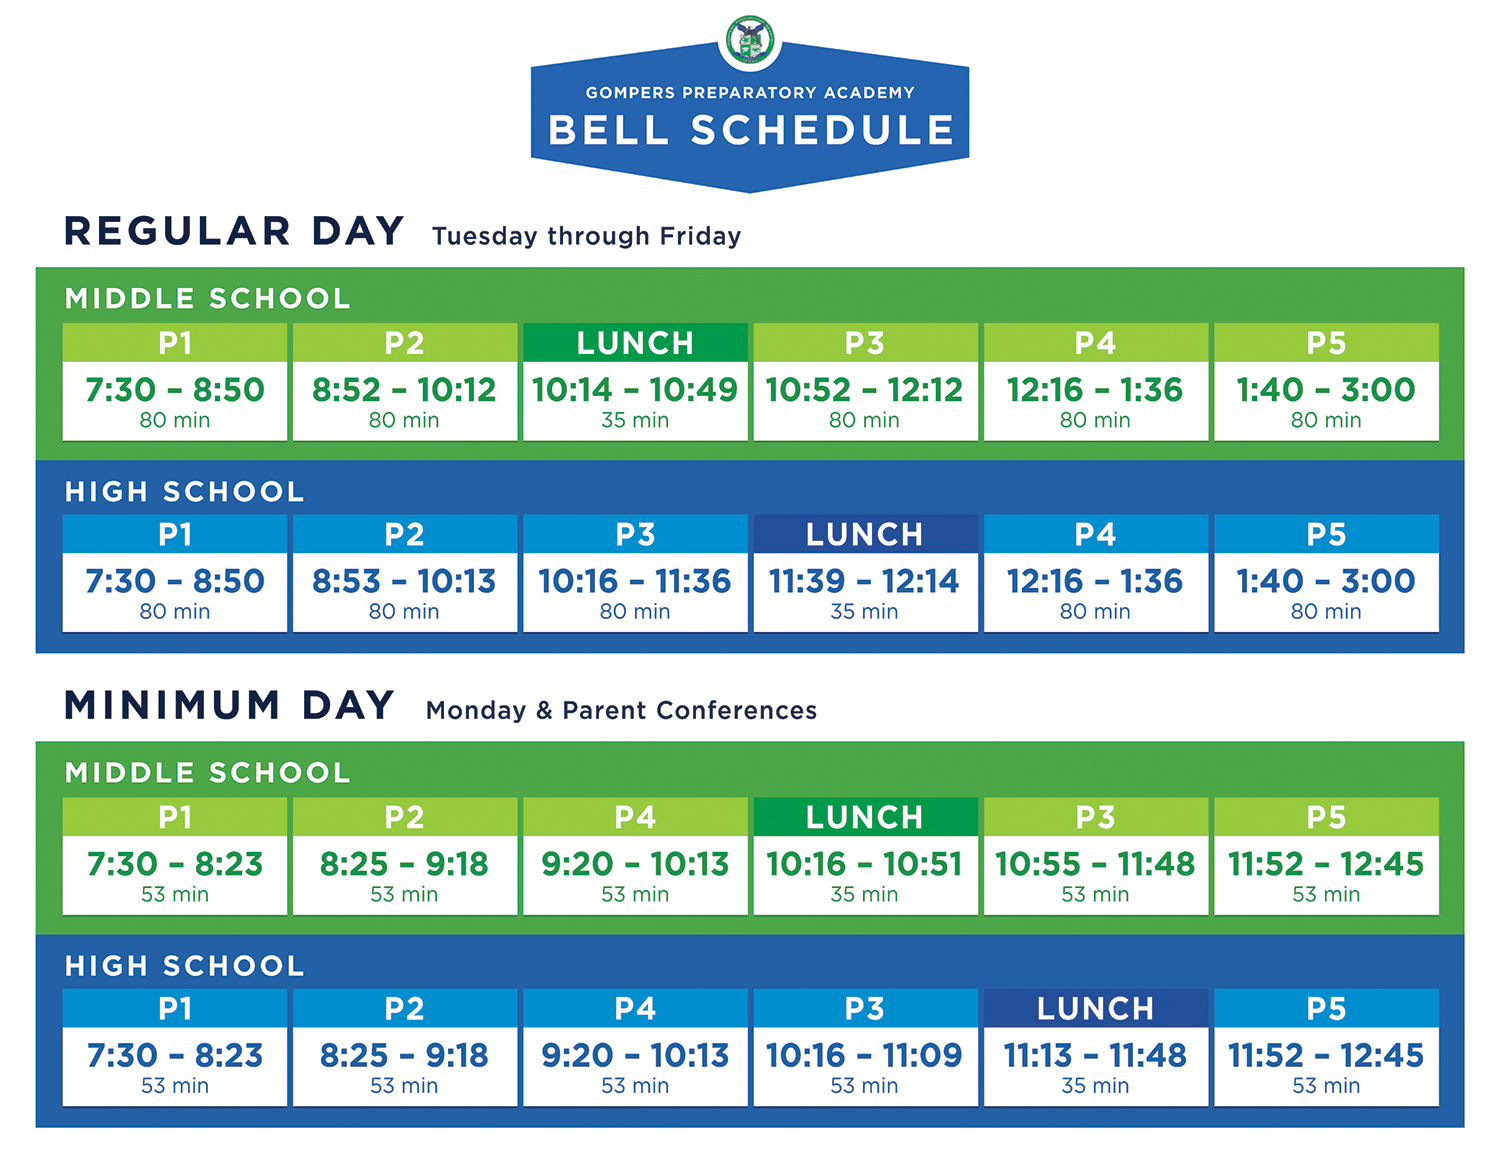 Bell Schedule Gompers Preparatory Academy